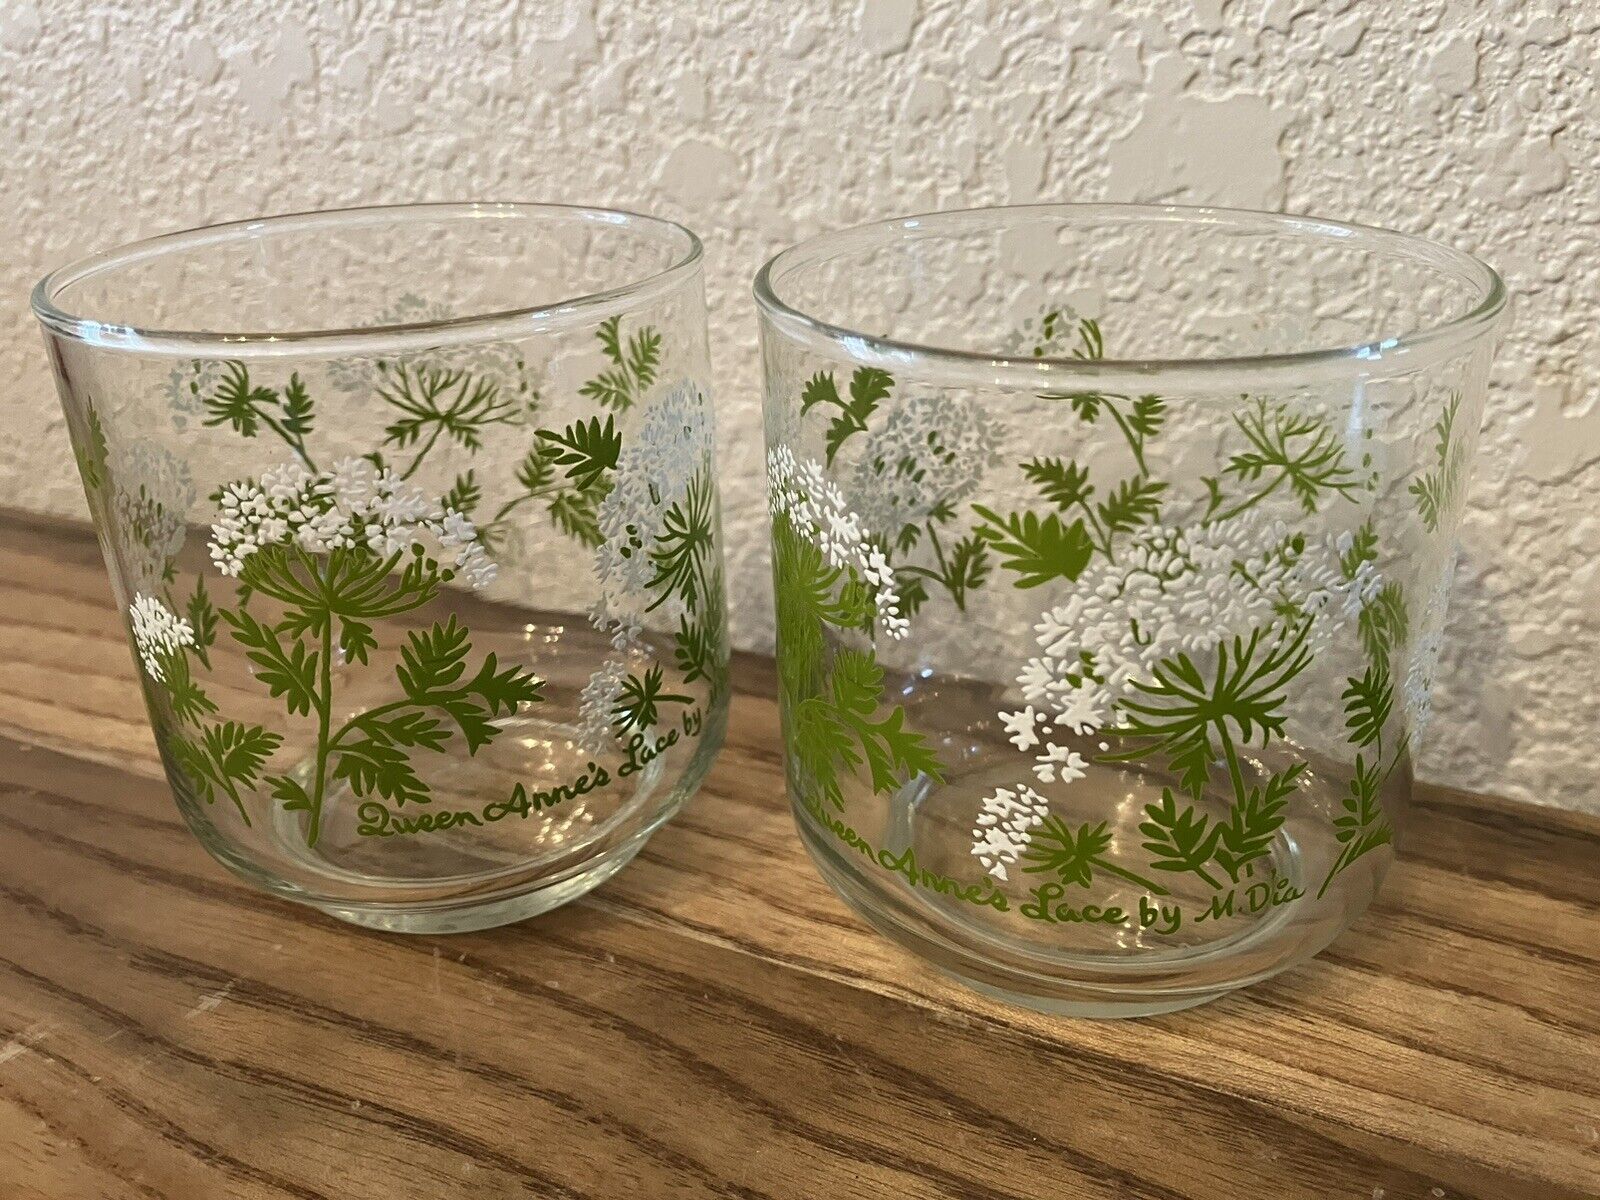 2 Queen Anne’s Lace Glasses 3”